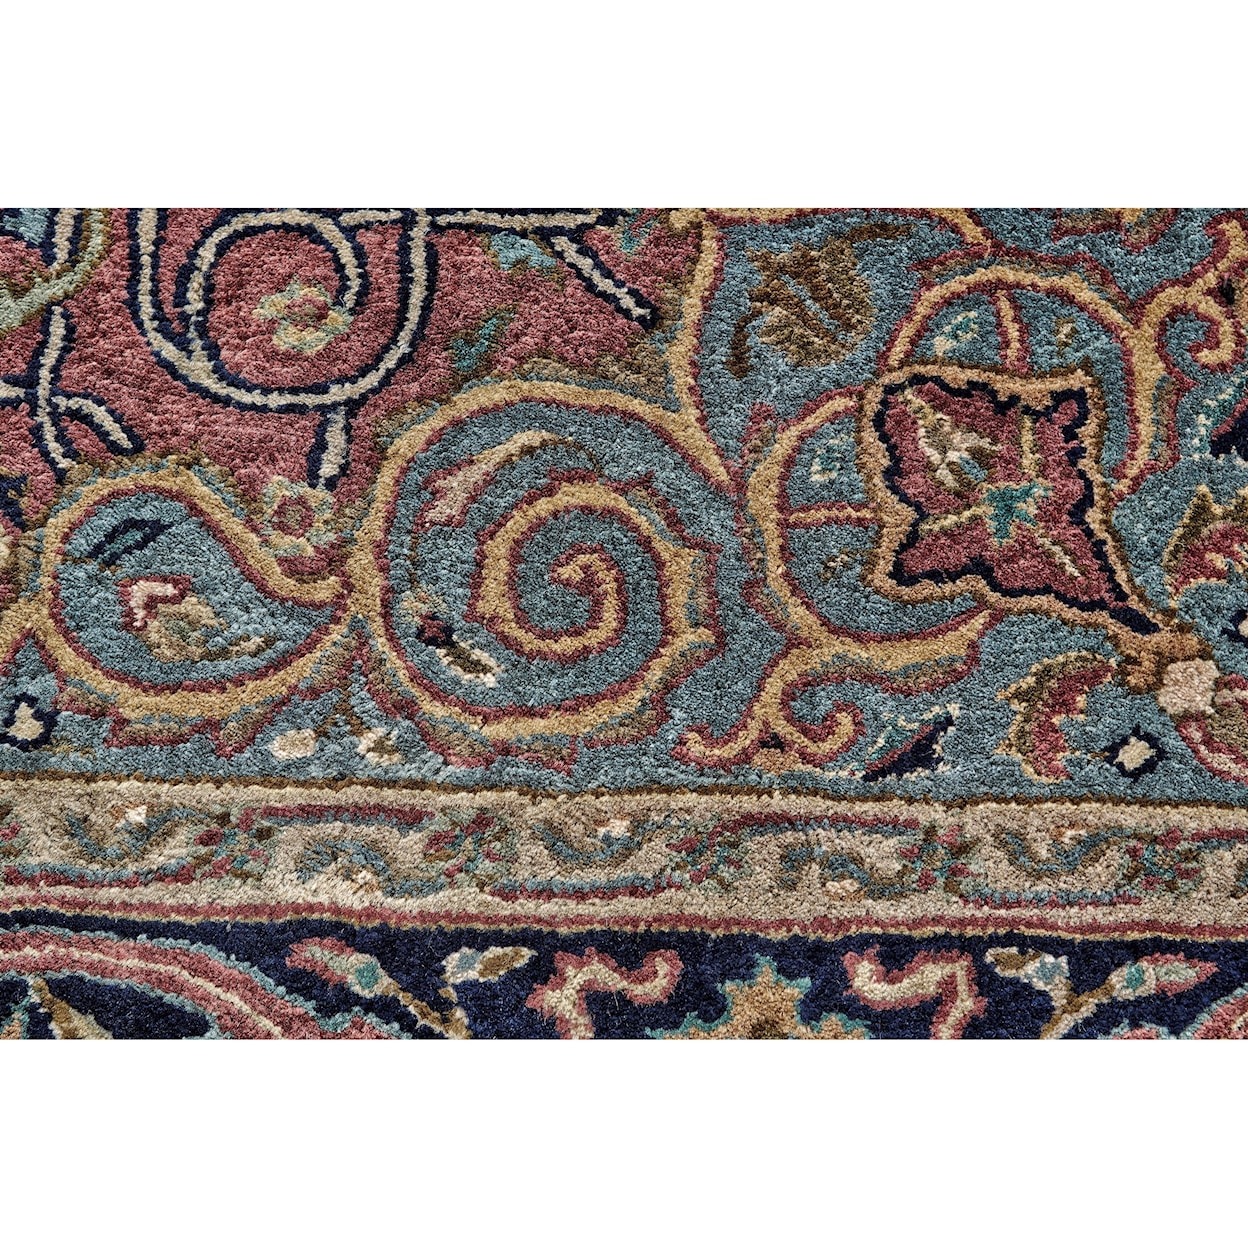 Feizy Rugs Amore Plum 9'-6" x 13'-6" Area Rug